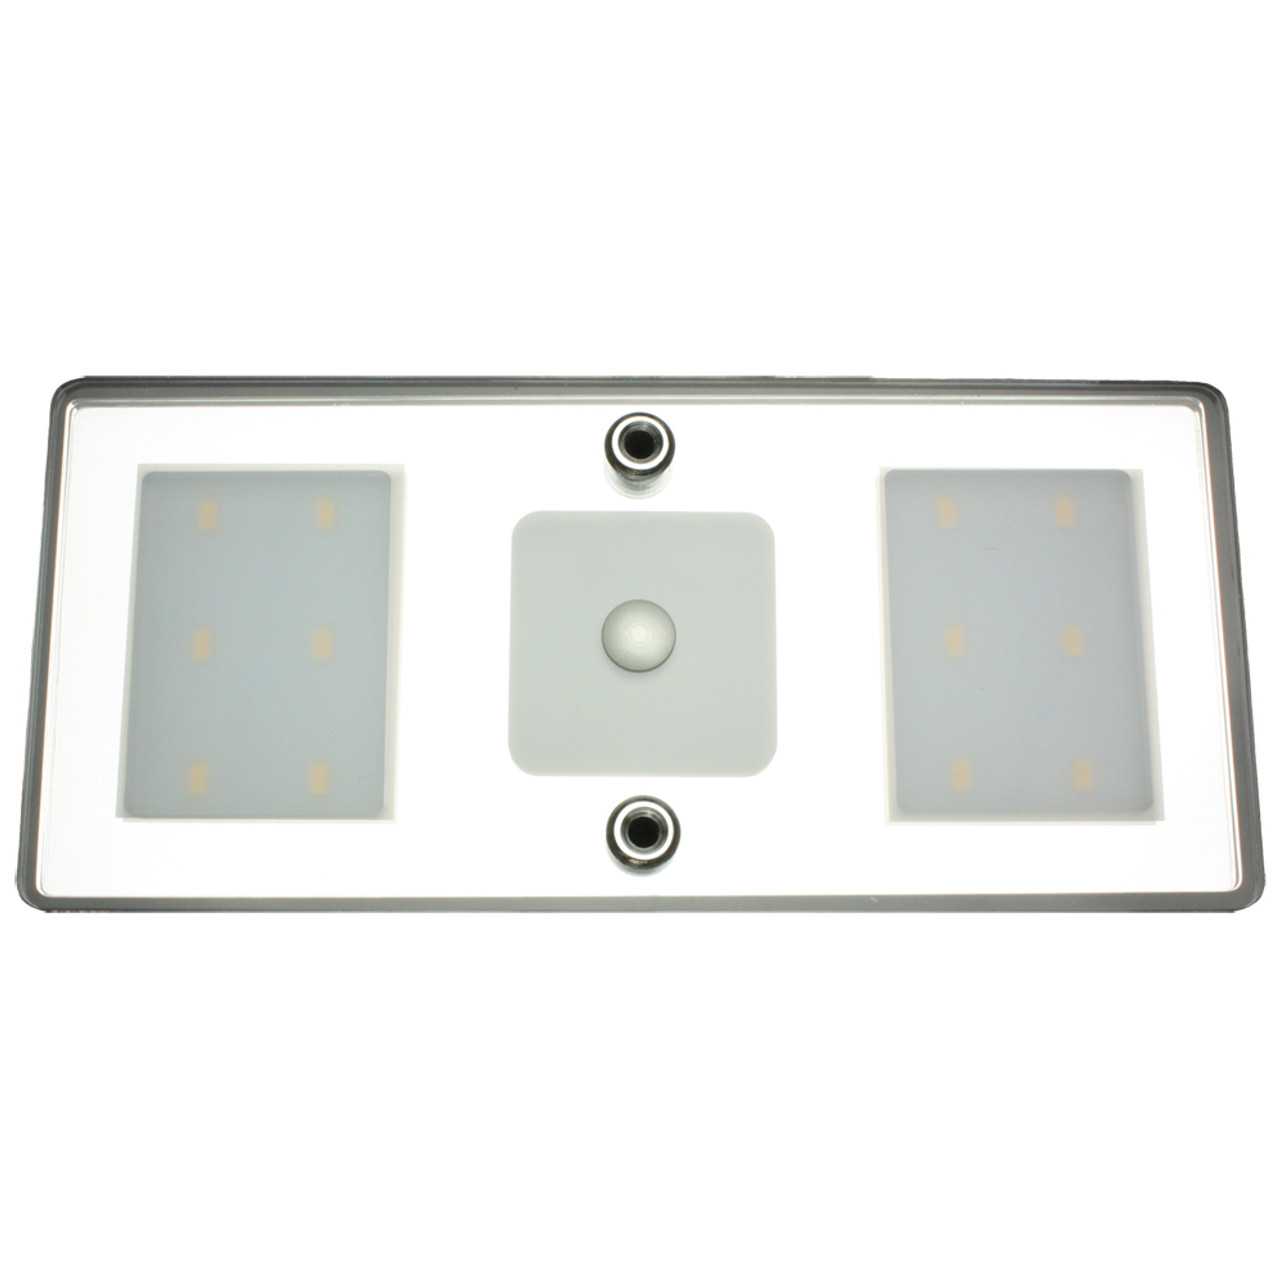 Lunasea LED Ceiling\/Wall Light Fixture - Touch Dimming - Warm White - 6W [LLB-33CW-81-OT]